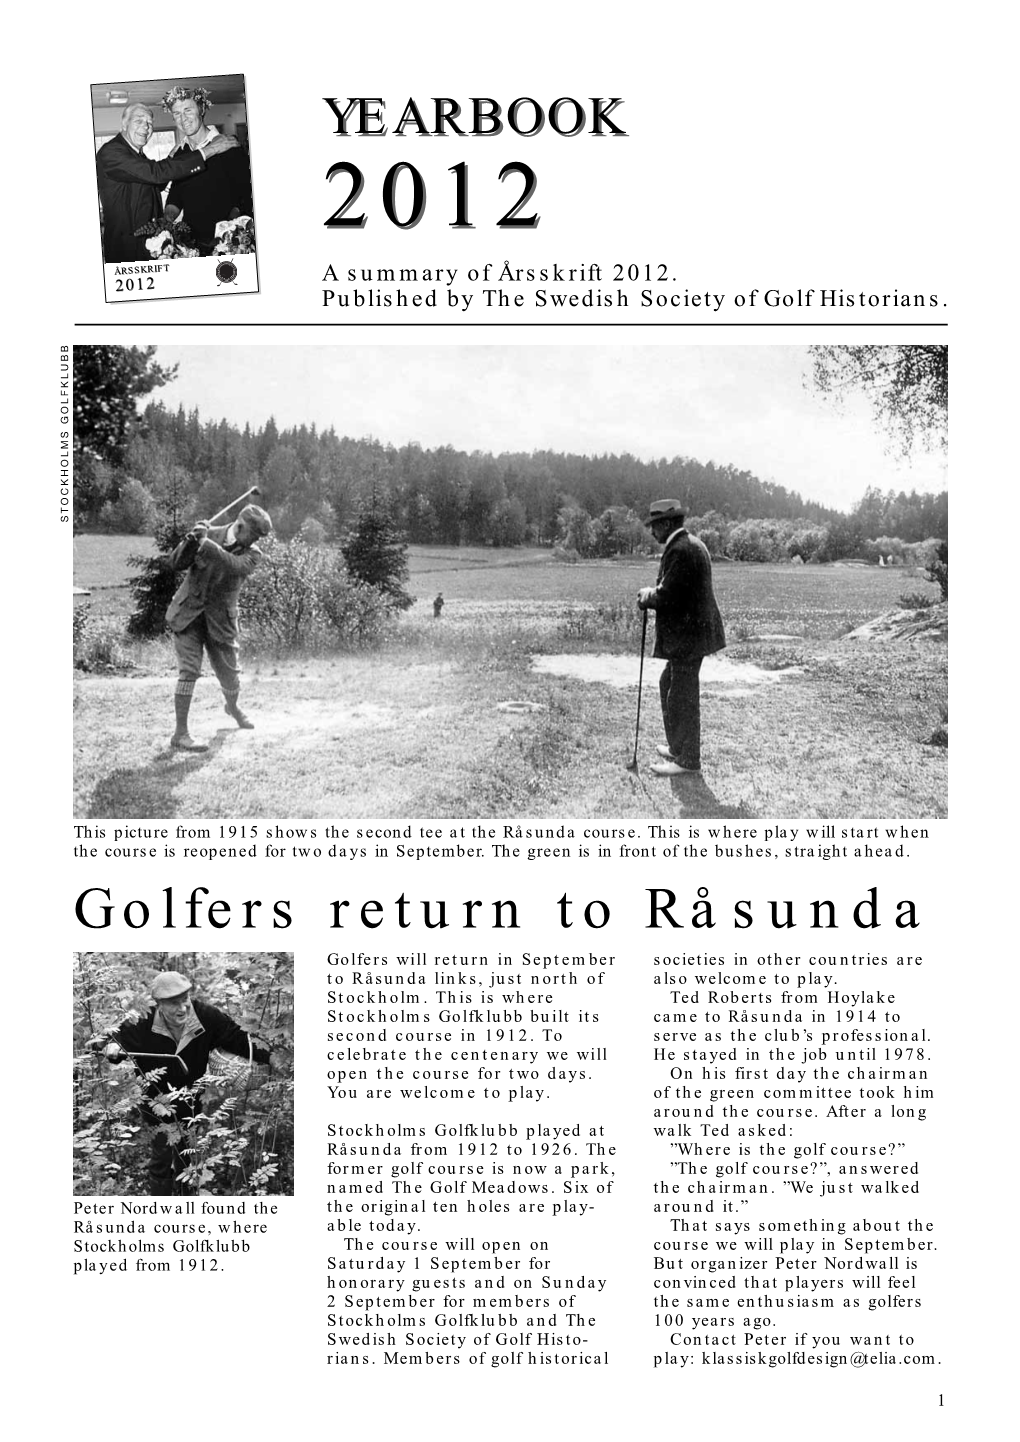 Golfers Return to Råsunda Golfers Will Return in September Societies in Other Countries Are to Råsunda Links, Just North of Also Welcome to Play